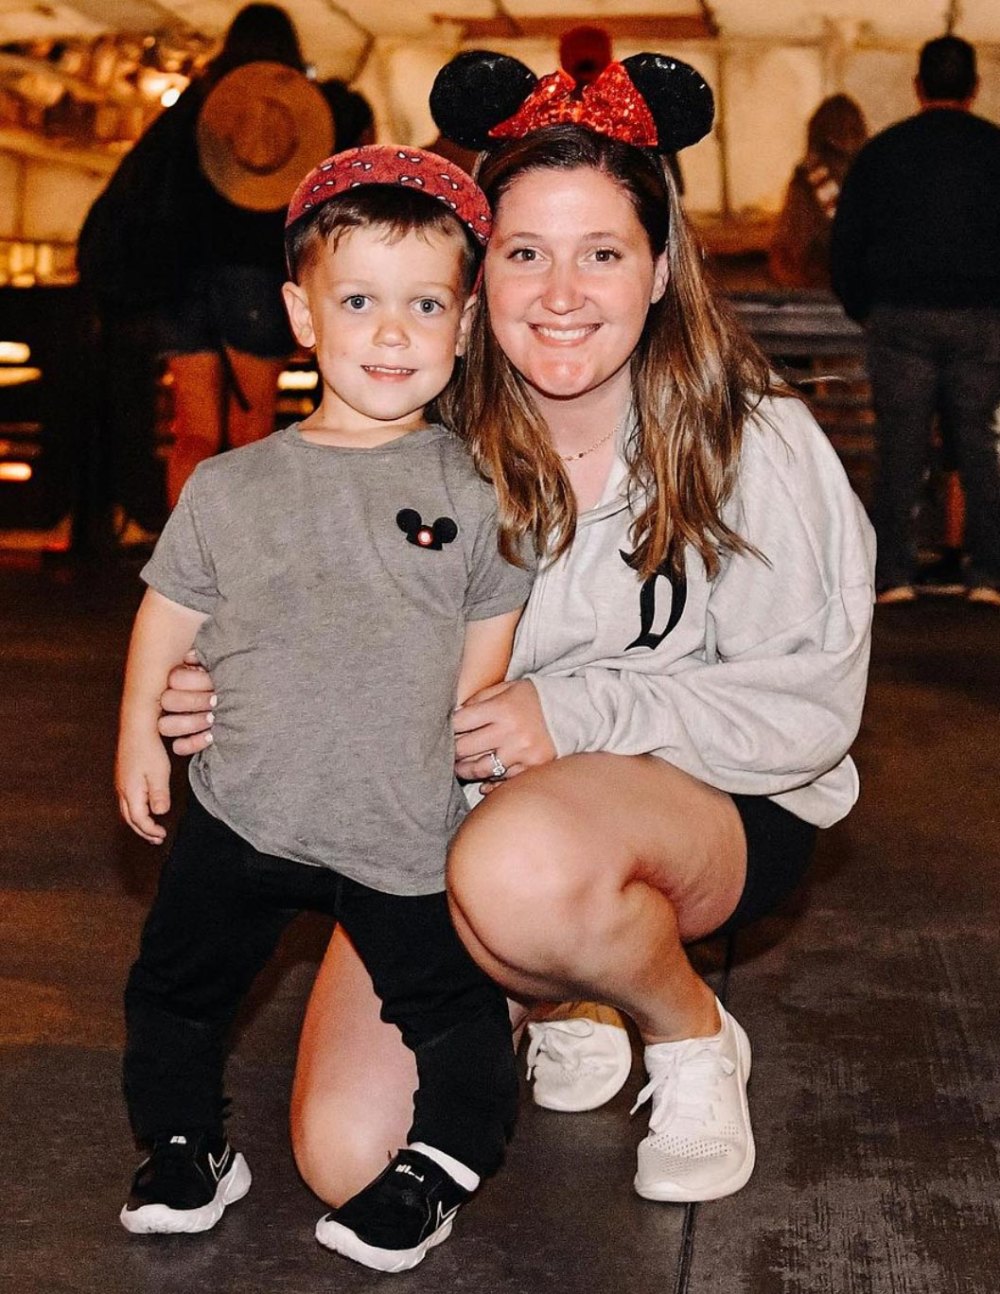 Tori Roloff ‘Loved Spending 1 on 1 Time’ With Son Jackson During Disneyland Getaway